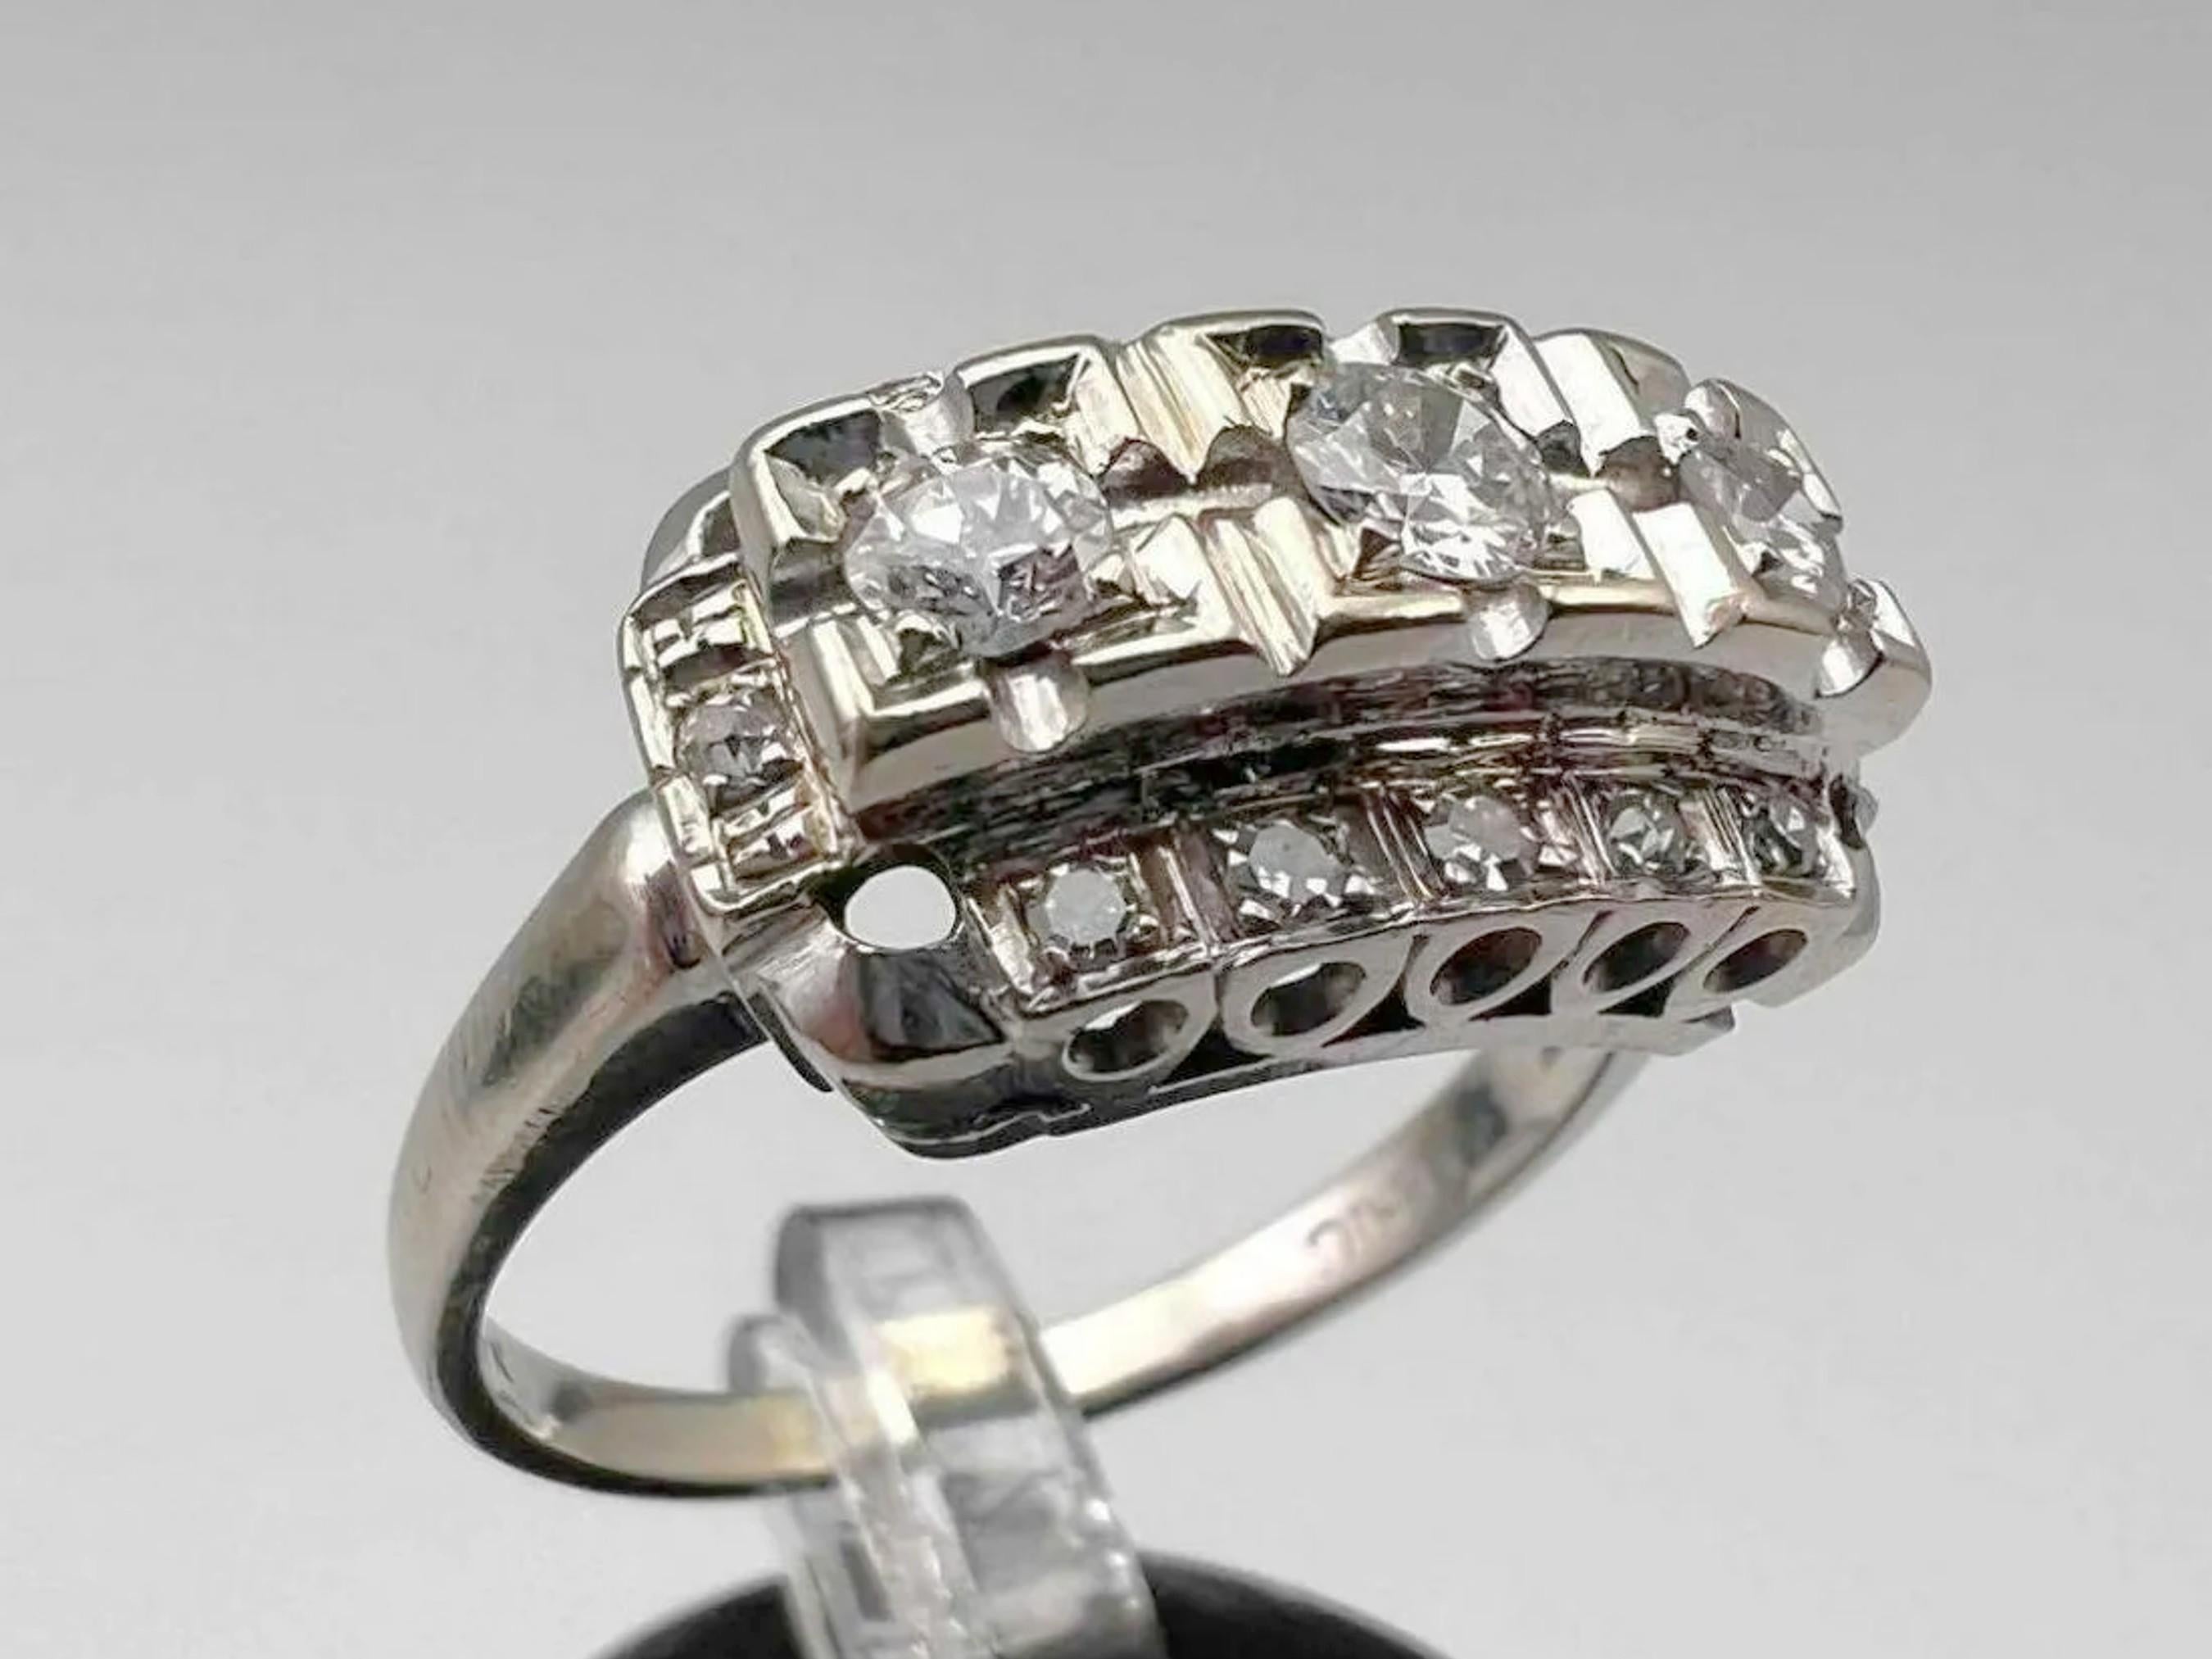 A stunning 15-diamond Art Deco vintage engagement ring set in 14k white gold. The ring face steps up to three prong-set round diamonds in square settings. Below are 5 diamonds in a row on either side, with a further stone on each shoulder.